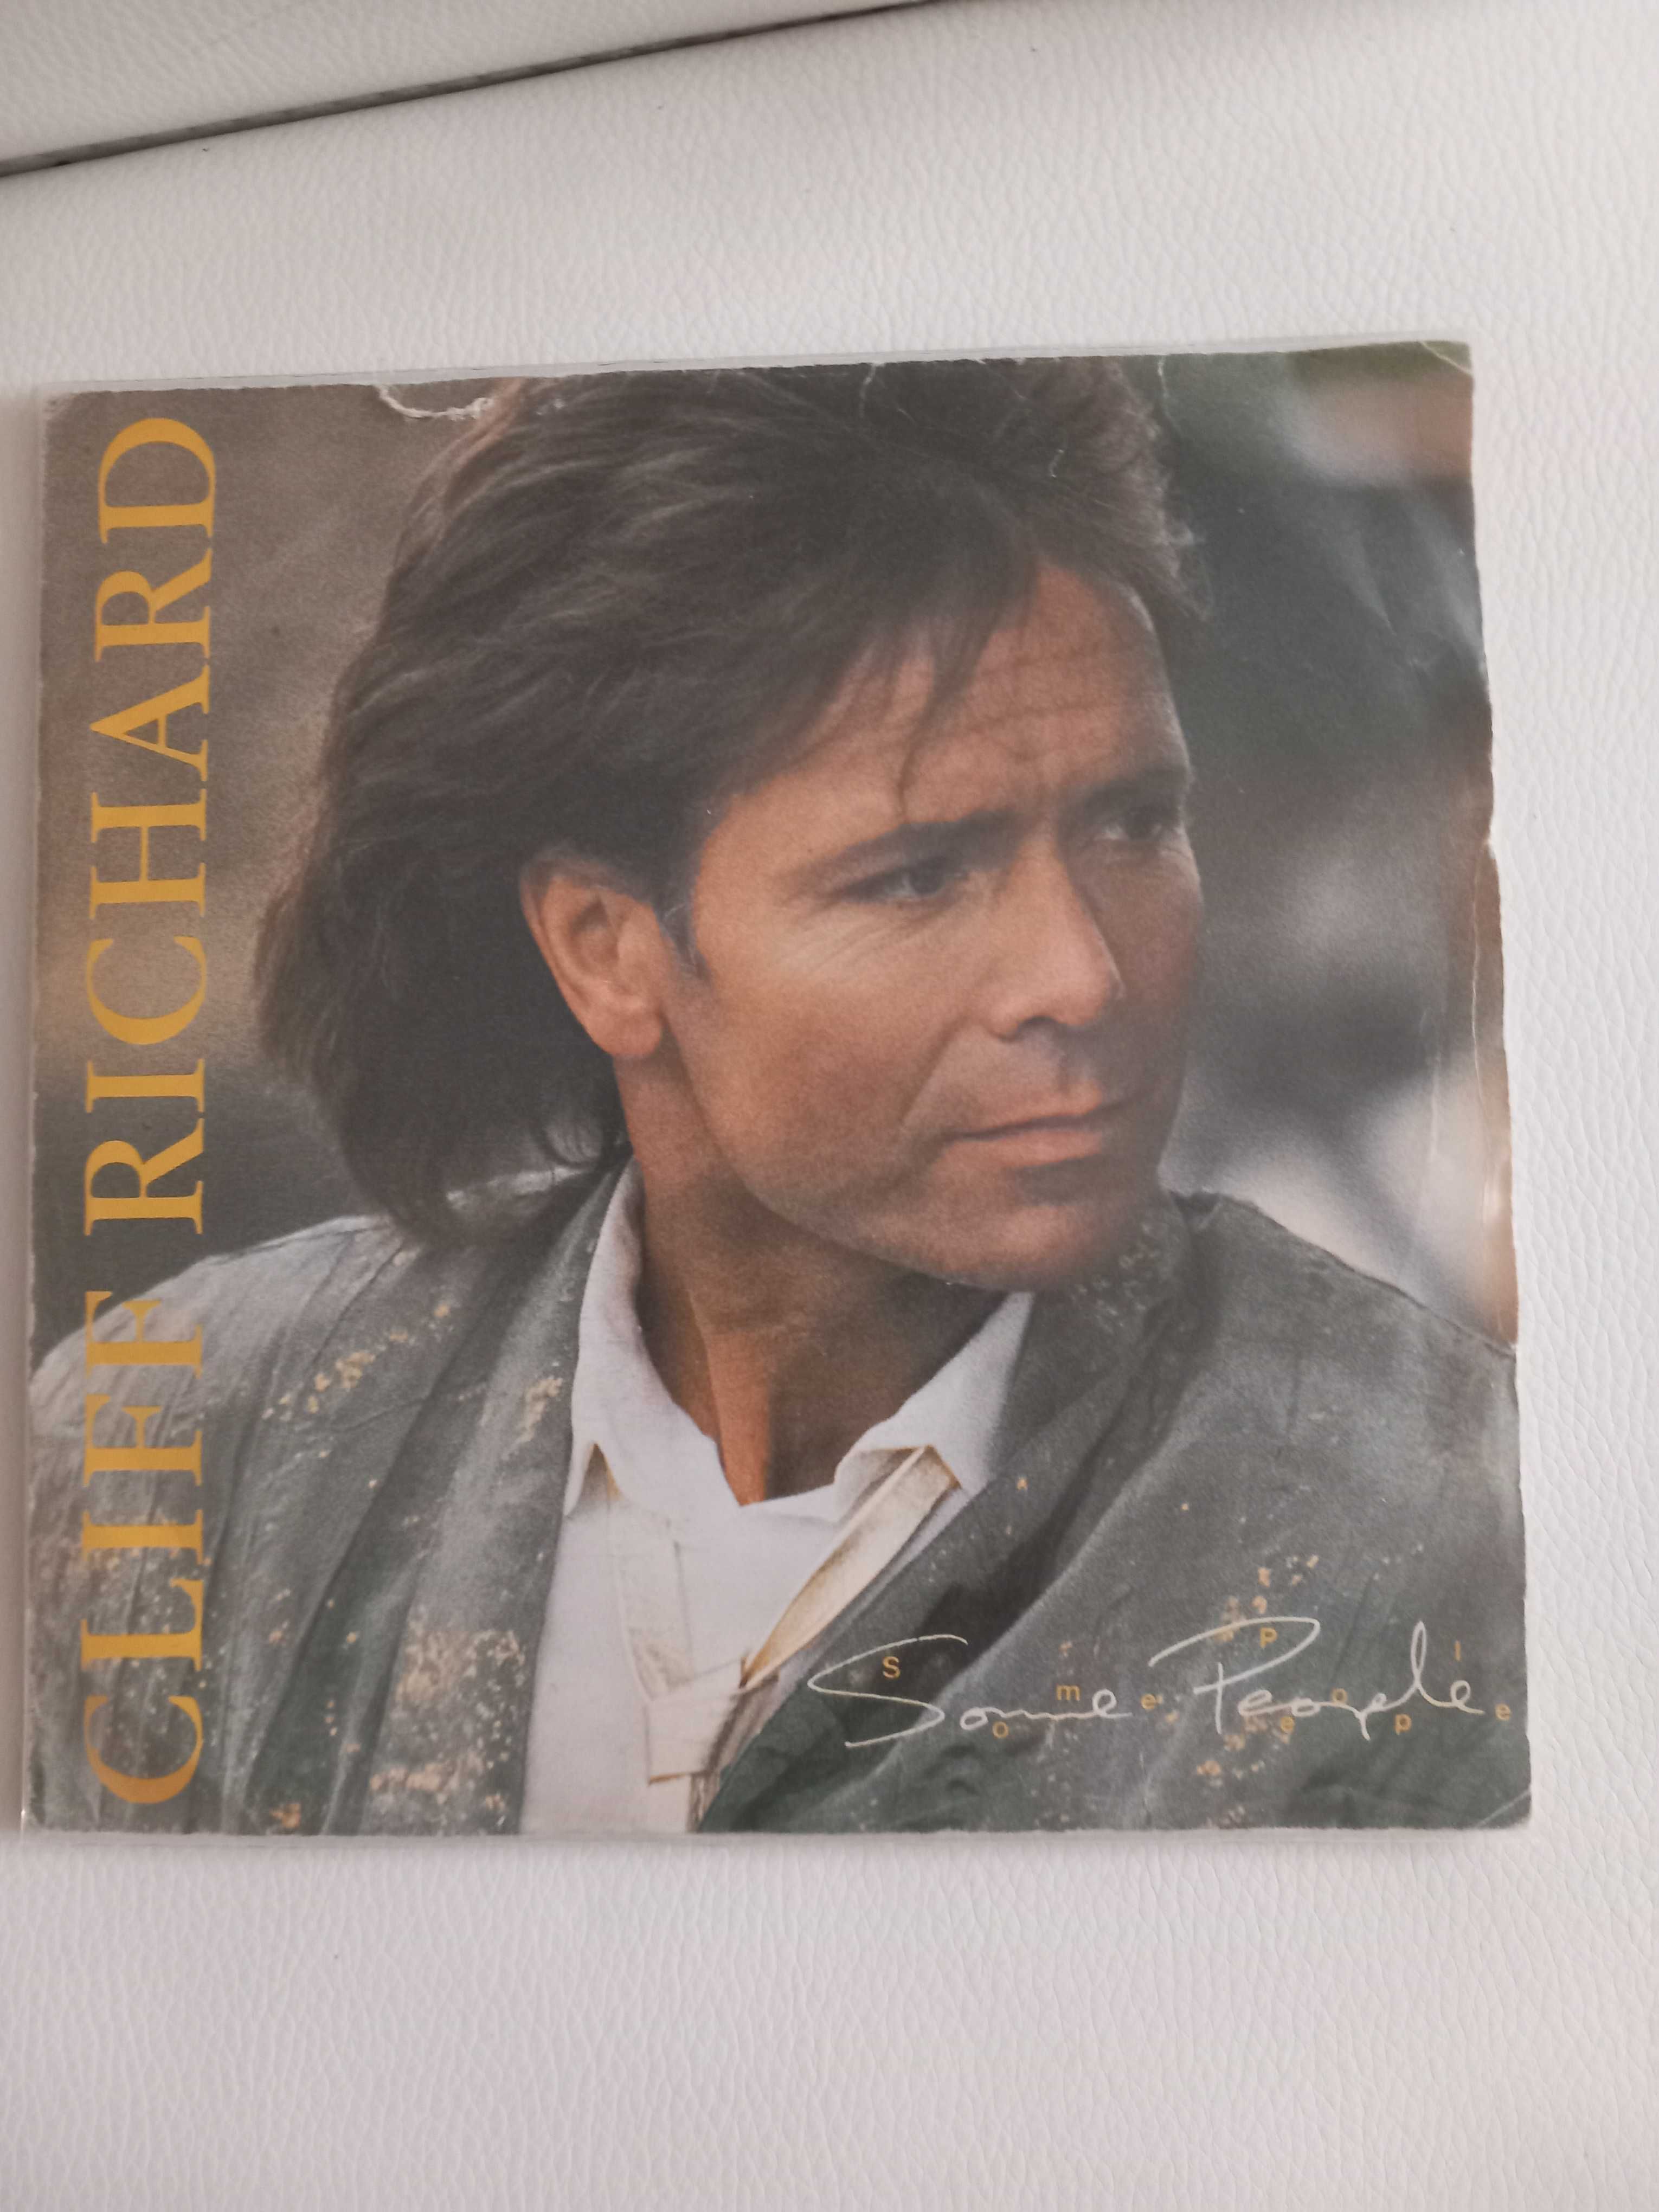 Cliff Richard - some people / one time lover man - singiel